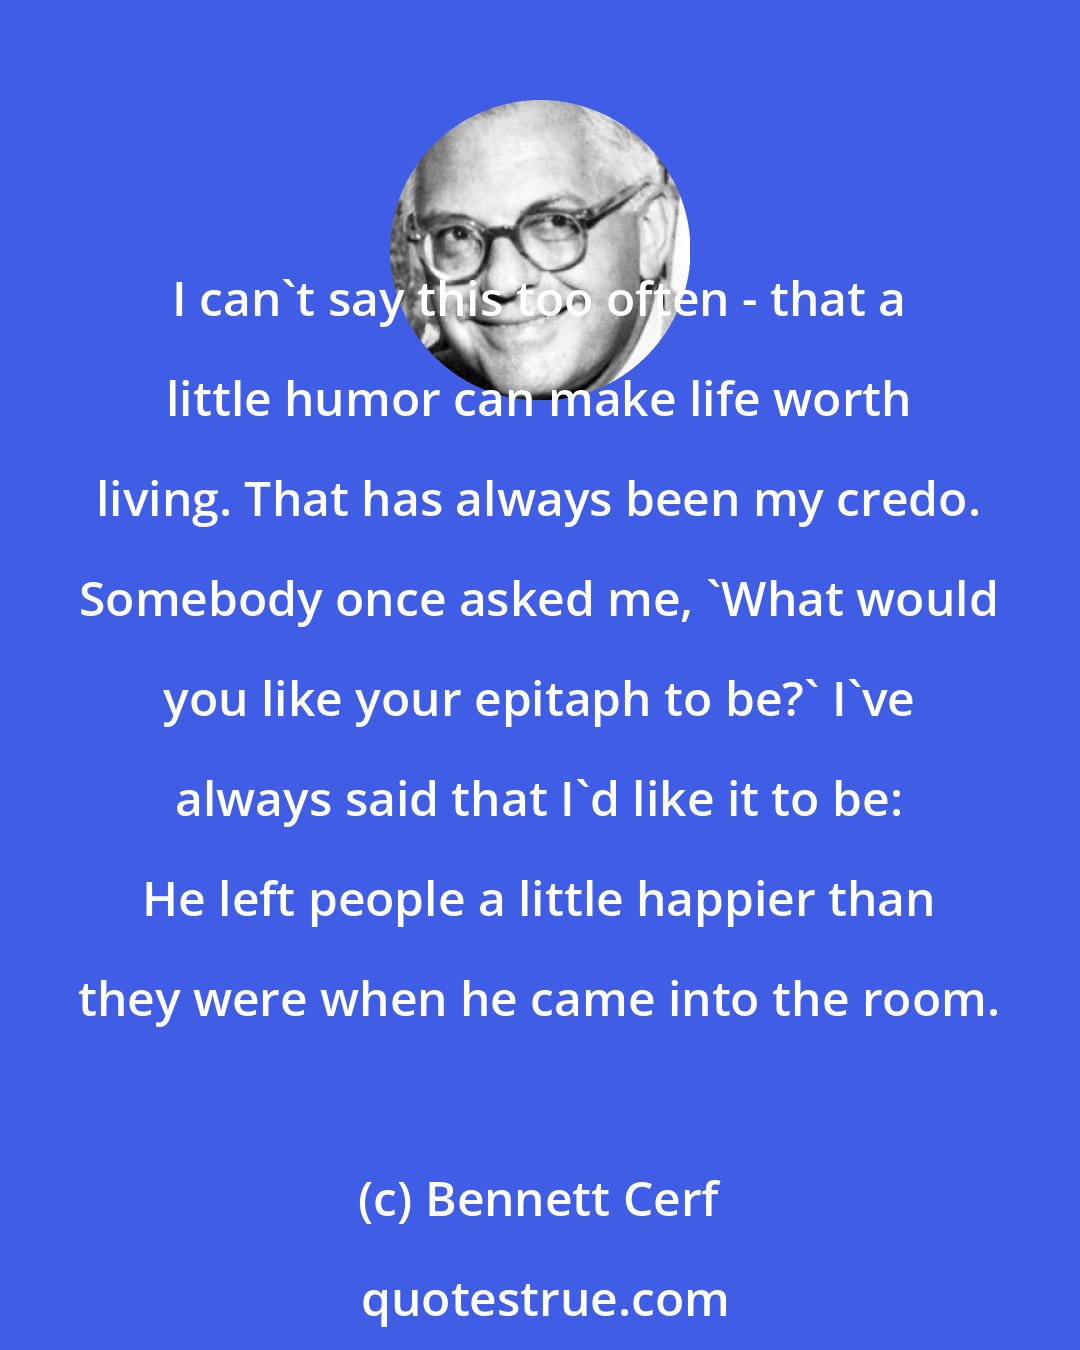 Bennett Cerf: I can't say this too often - that a little humor can make life worth living. That has always been my credo. Somebody once asked me, 'What would you like your epitaph to be?' I've always said that I'd like it to be: He left people a little happier than they were when he came into the room.